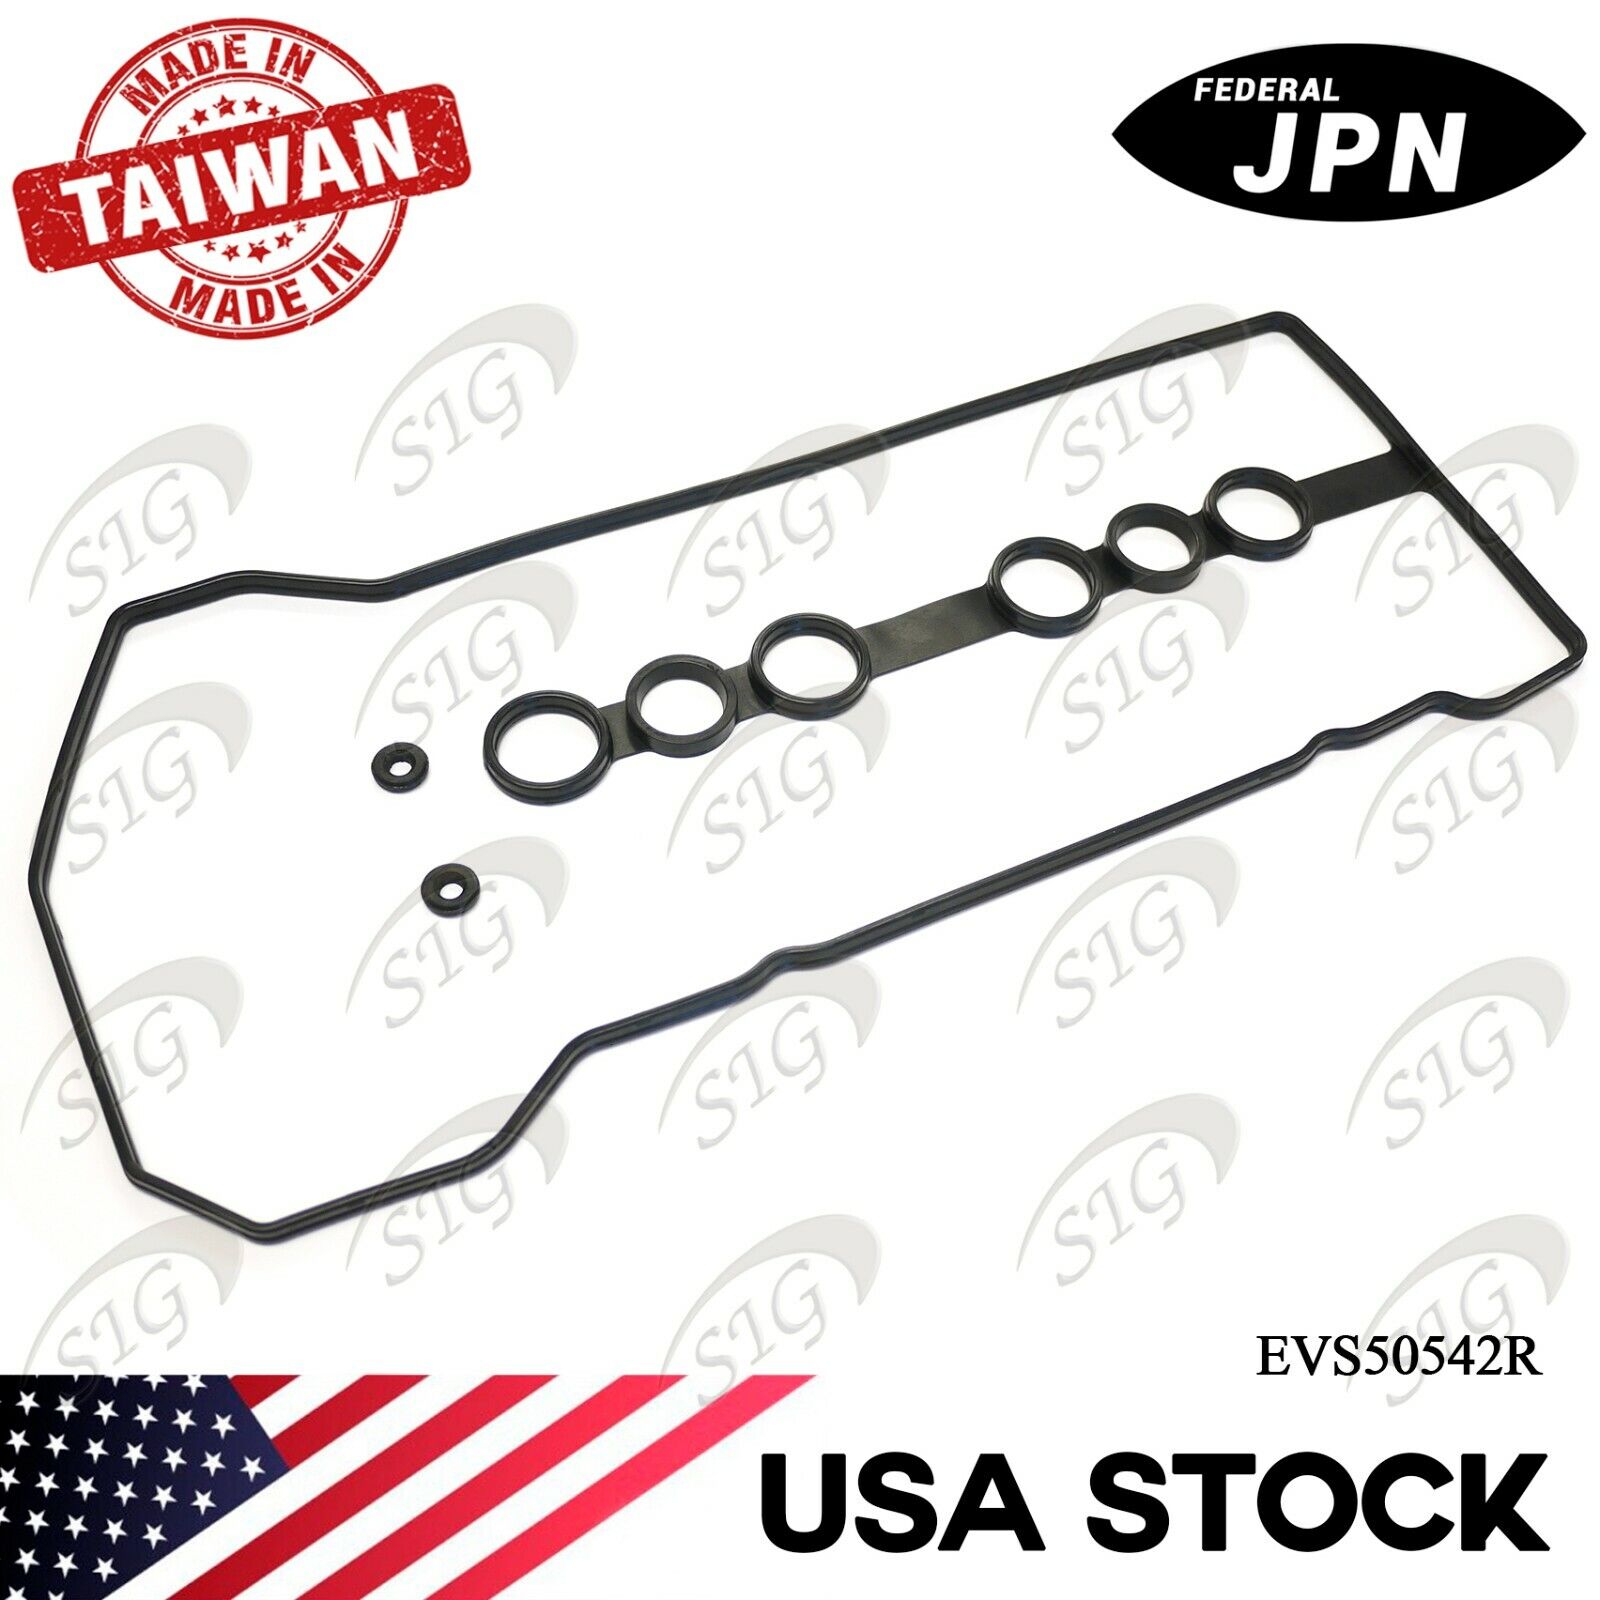 Engine Valve Cover Gasket Set for Toyota Corolla 2000-2008 1.8L L4 1794cc